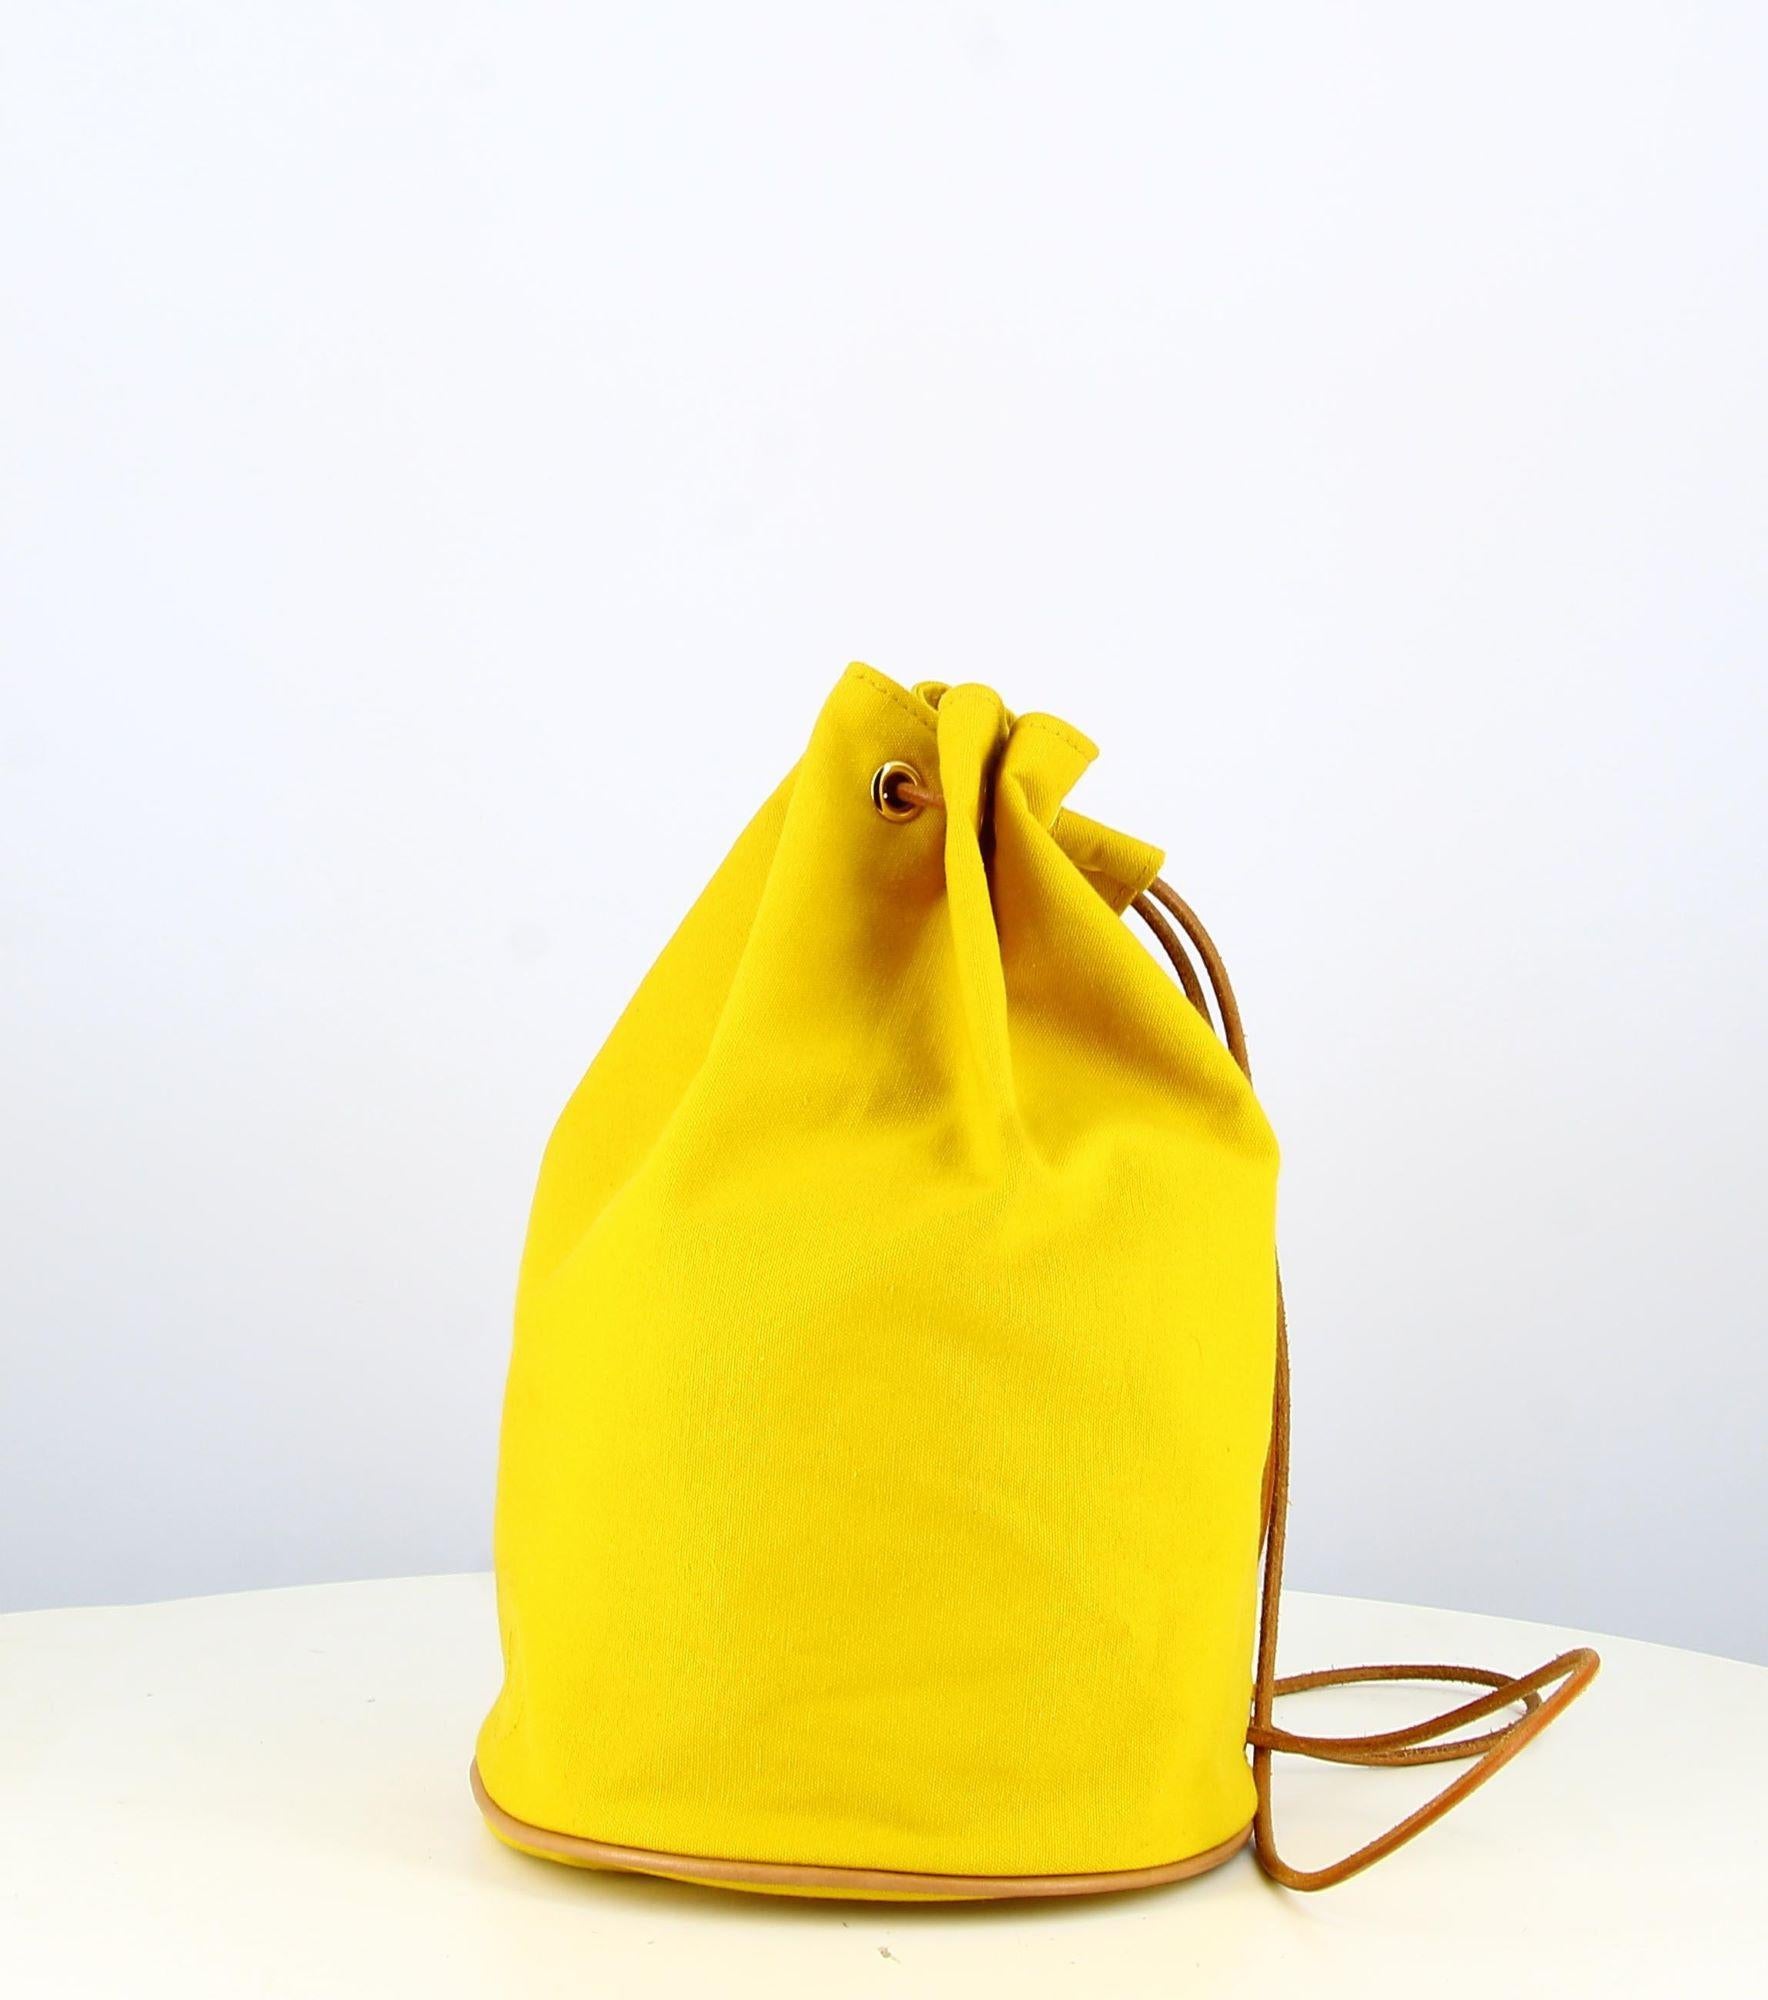 Yellow Hermes Fabric Backpack

- Good condition, shows slight traces of wear over time.
- Yellow Hermes Backpack
- Fine brown leather straps
- Inside : yellow fabric
- Packaging: Opulence luxuyr vintage dust bag
Shipping costs included in the price